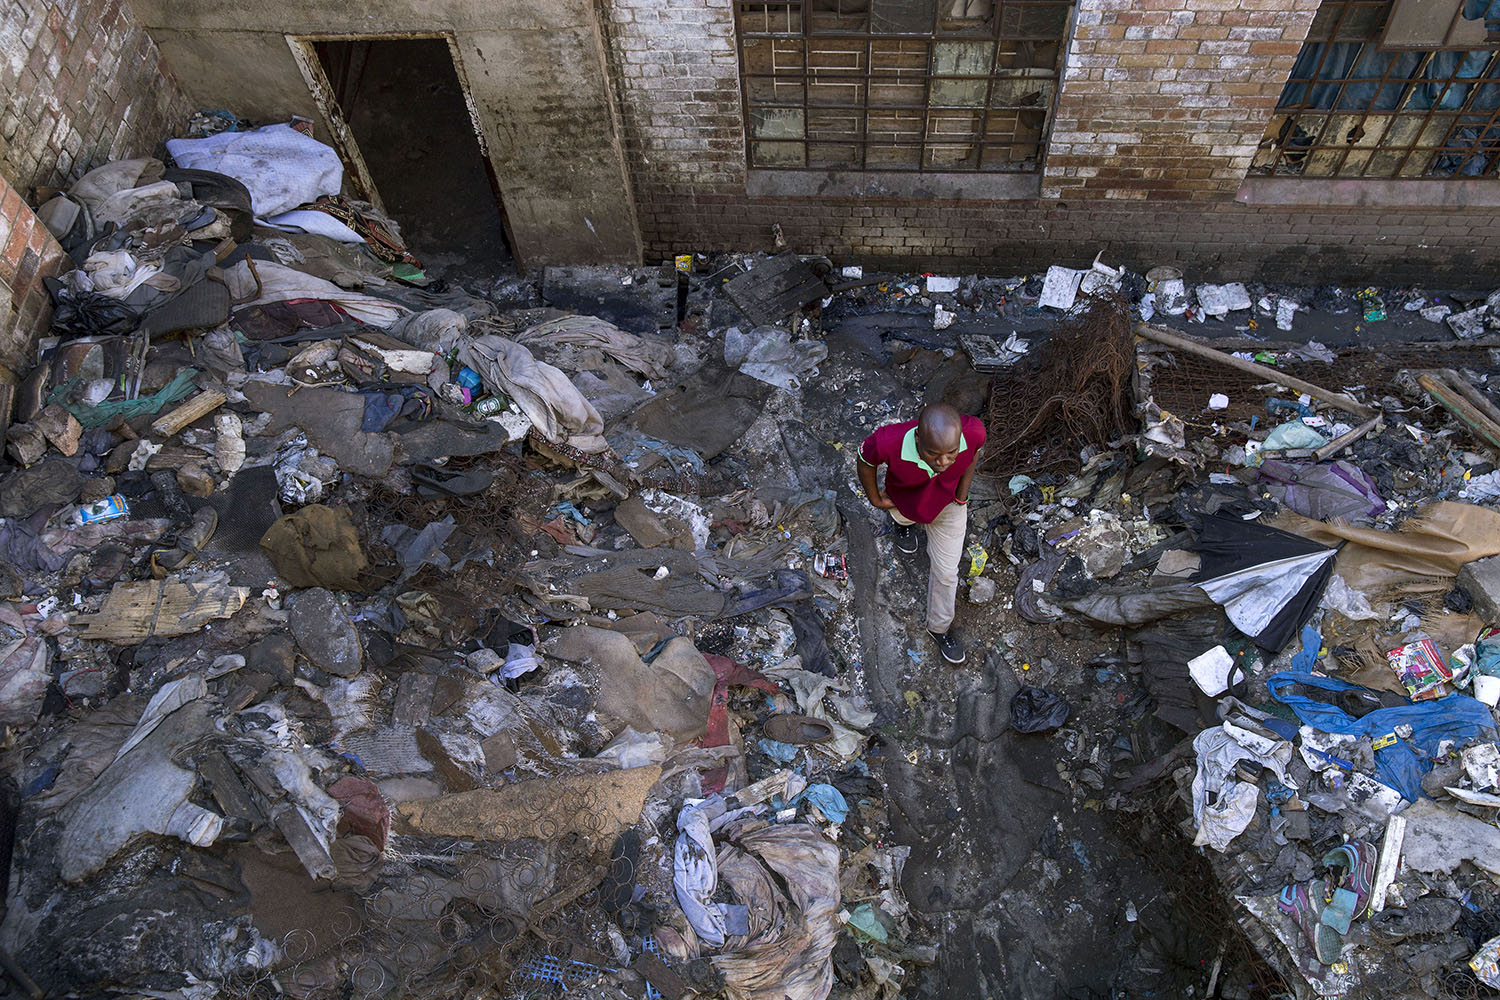 An African migrant resident walking in the rubbish filled courtyard between two derelict buildings, July19, 2015.